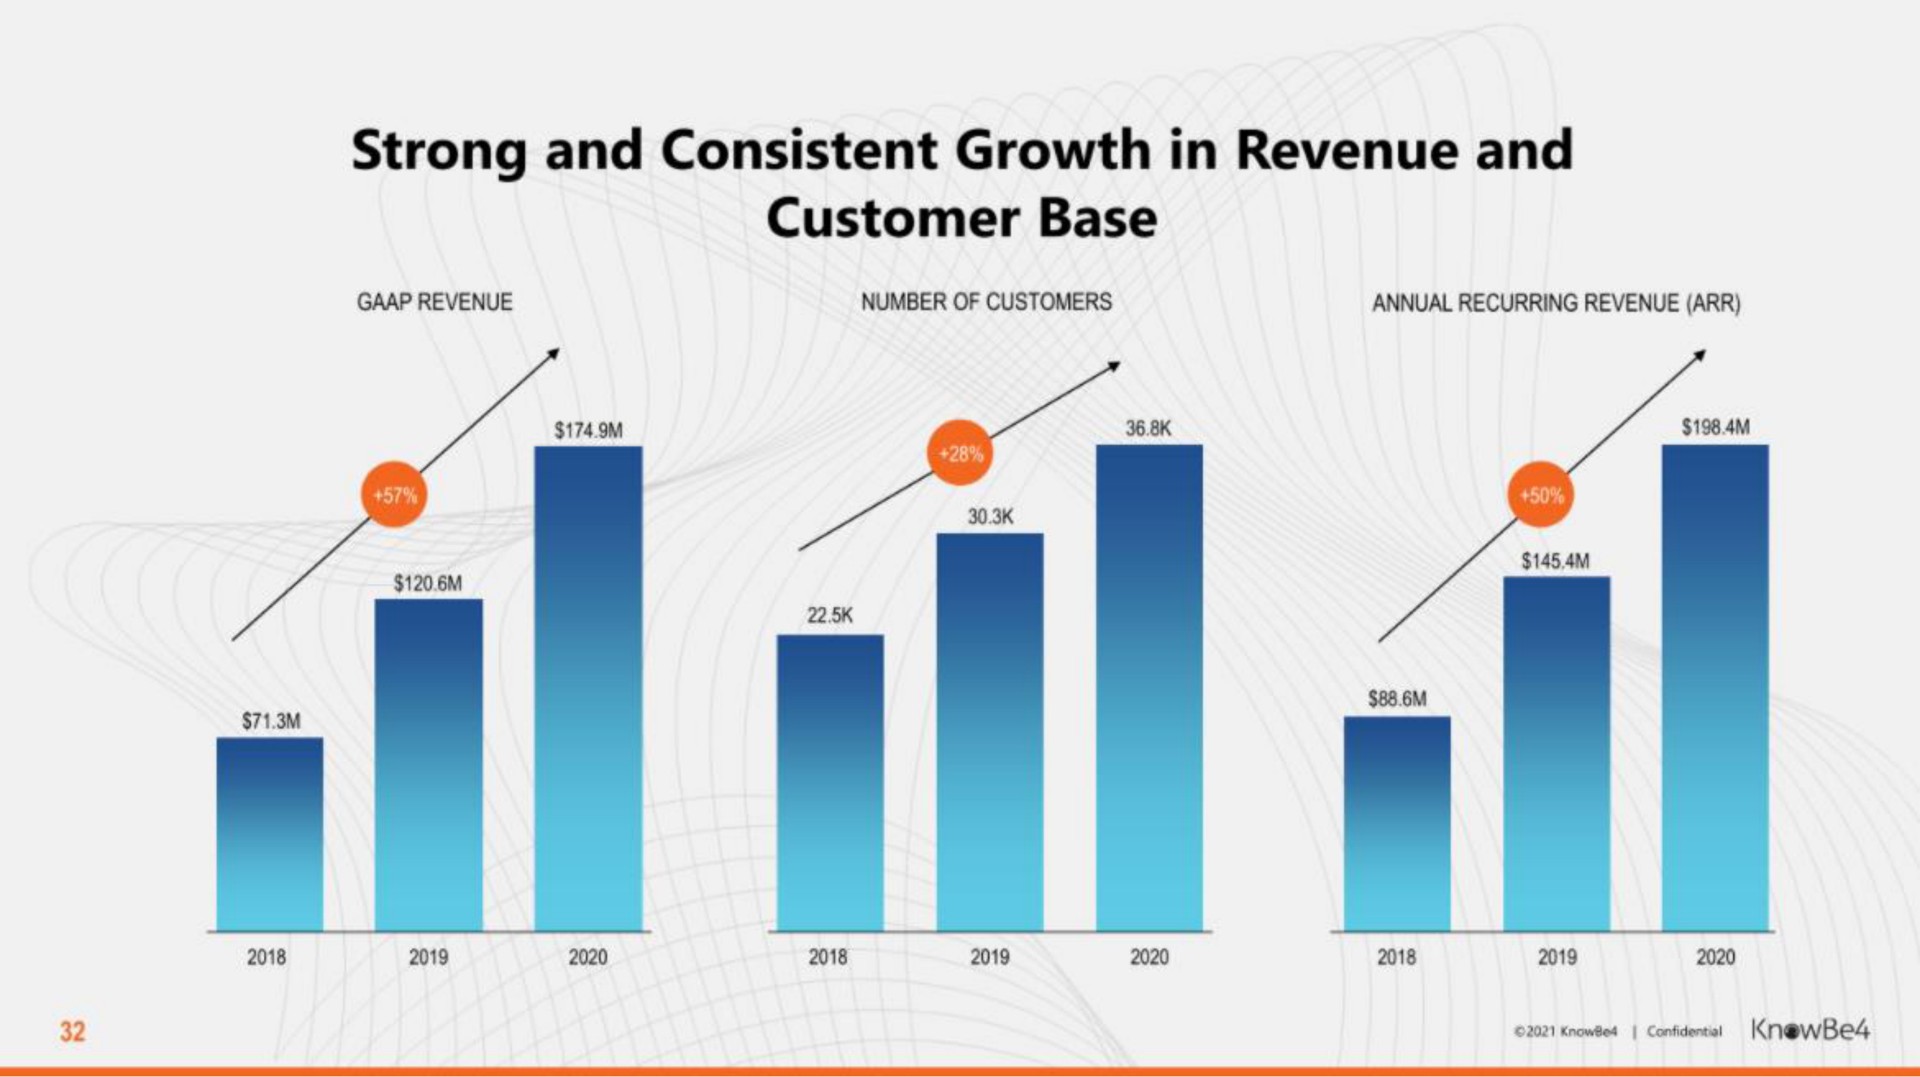 strong and consistent growth in revenue and customer base | KnowBe4